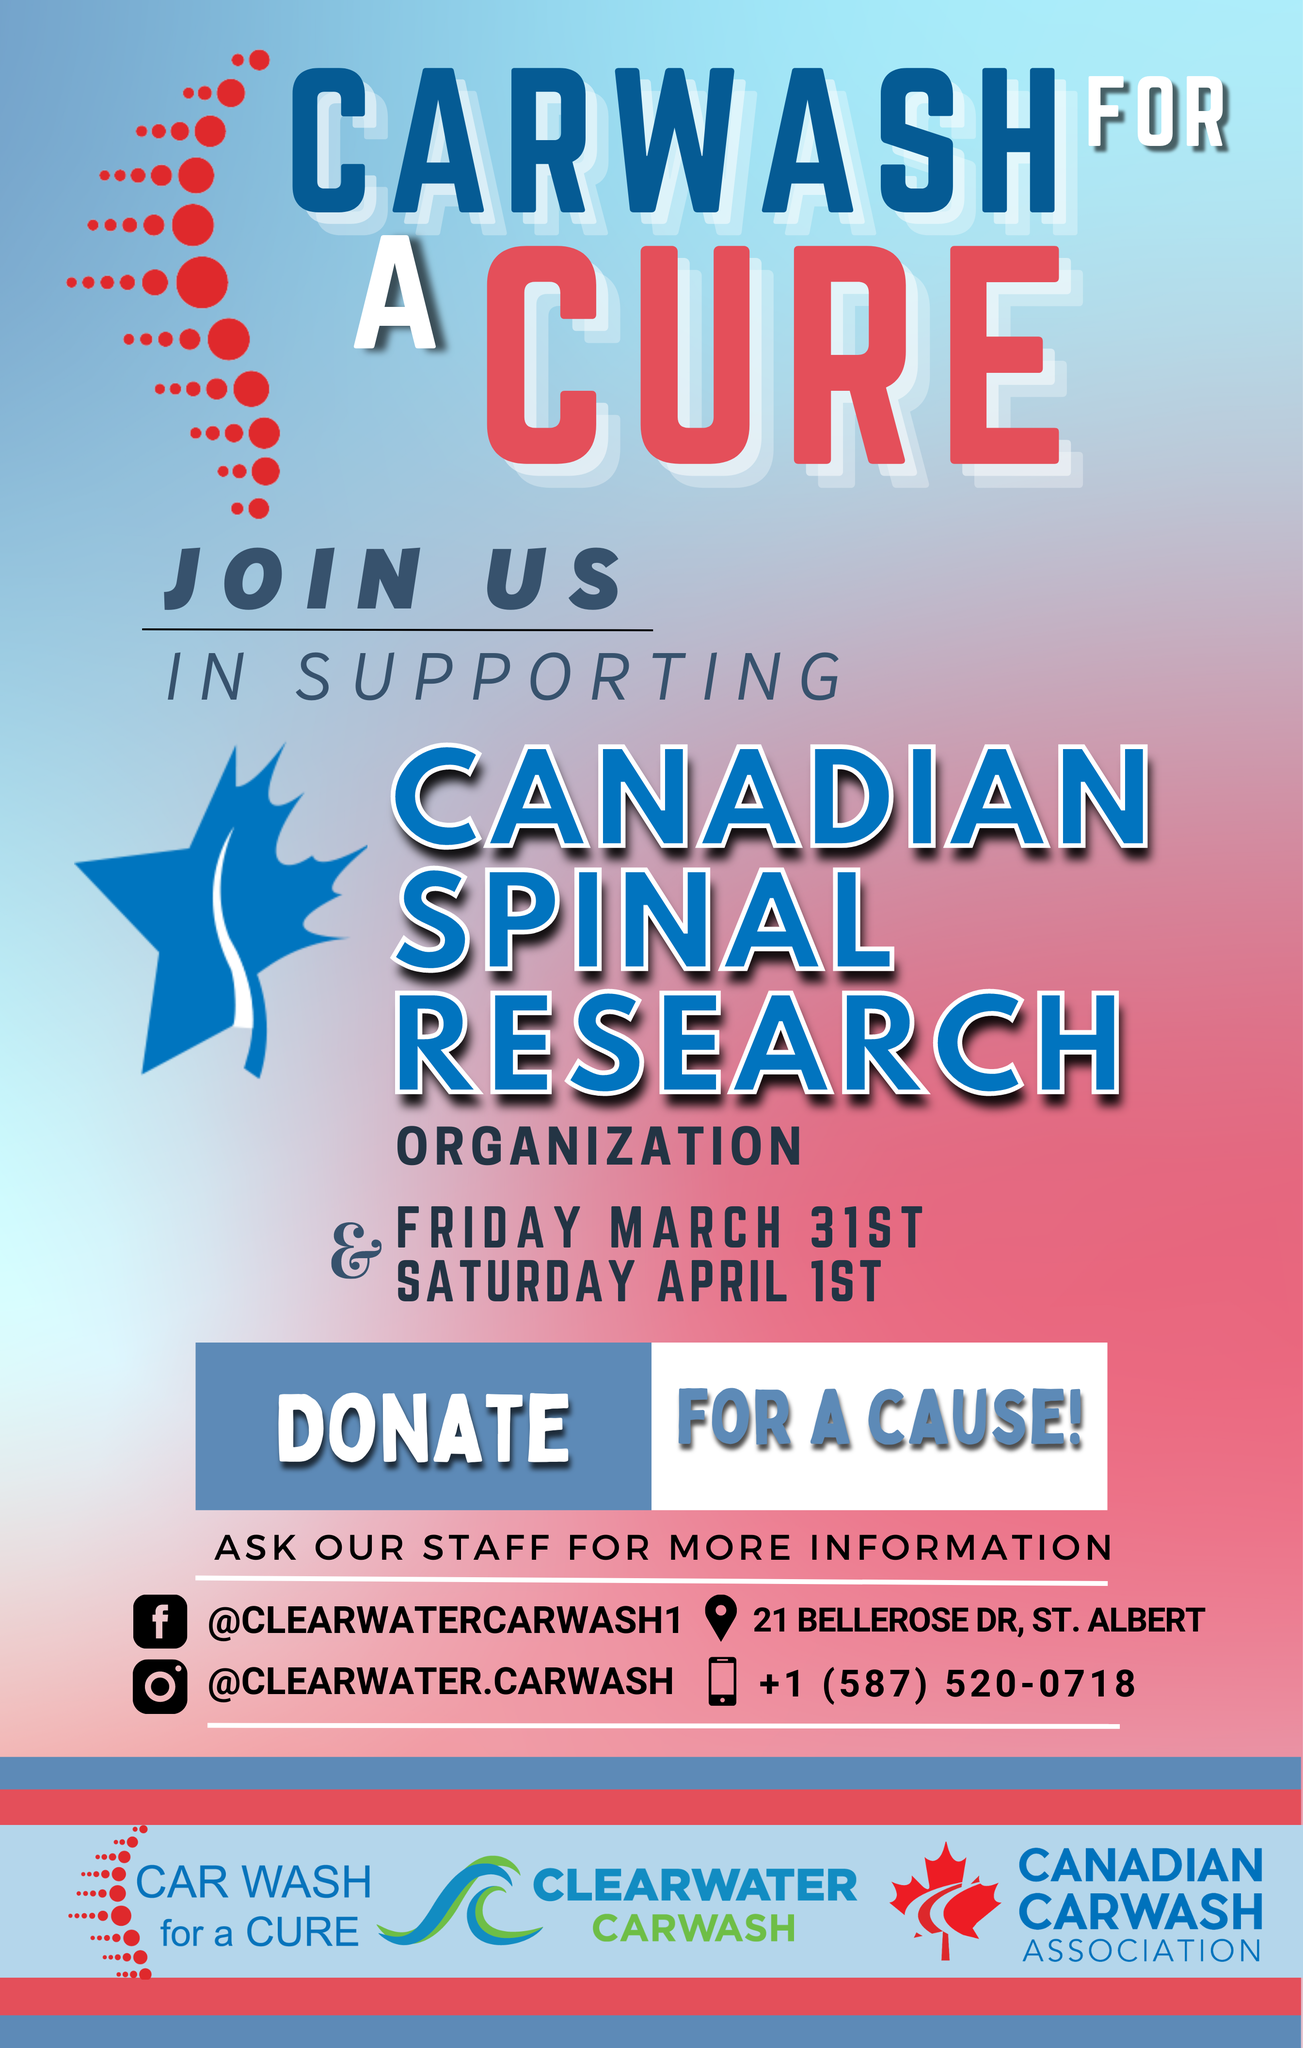 Poster promoting the donation event happening at ClearWater CarWash to support the Canadian Spinal Research Organization